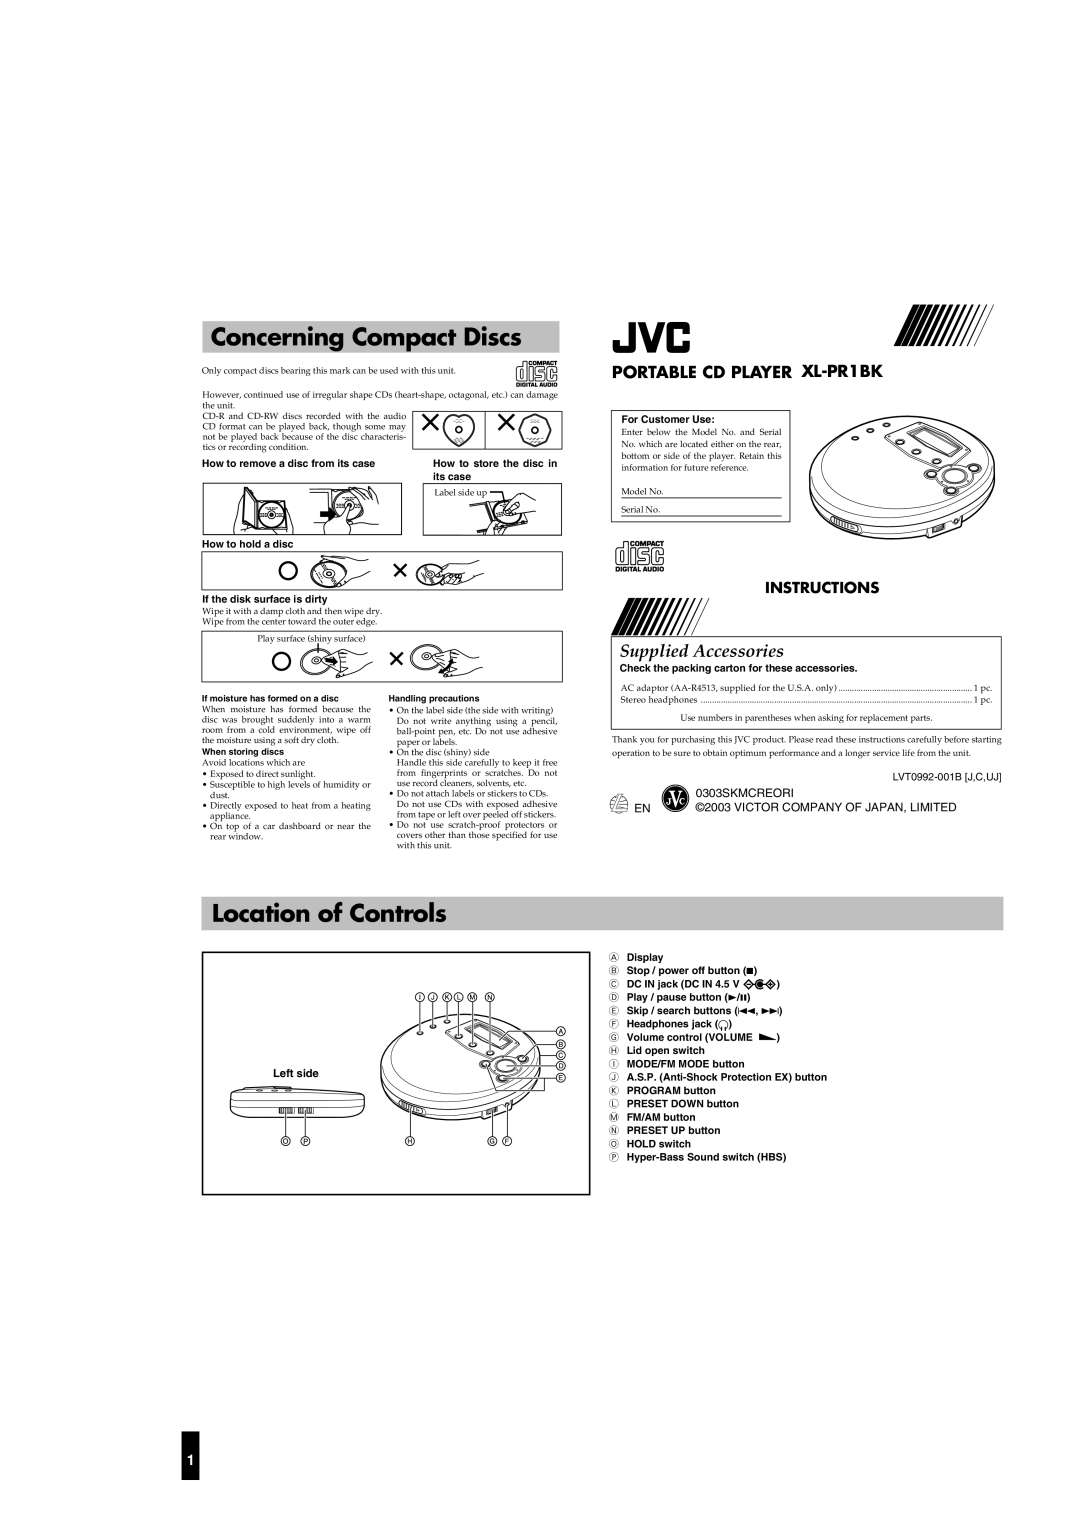 JVC XL-PR1BK manual Concerning Compact Discs, Location of Controls, 0303SKMCREORI, Victor Company Of Japan, Limited 